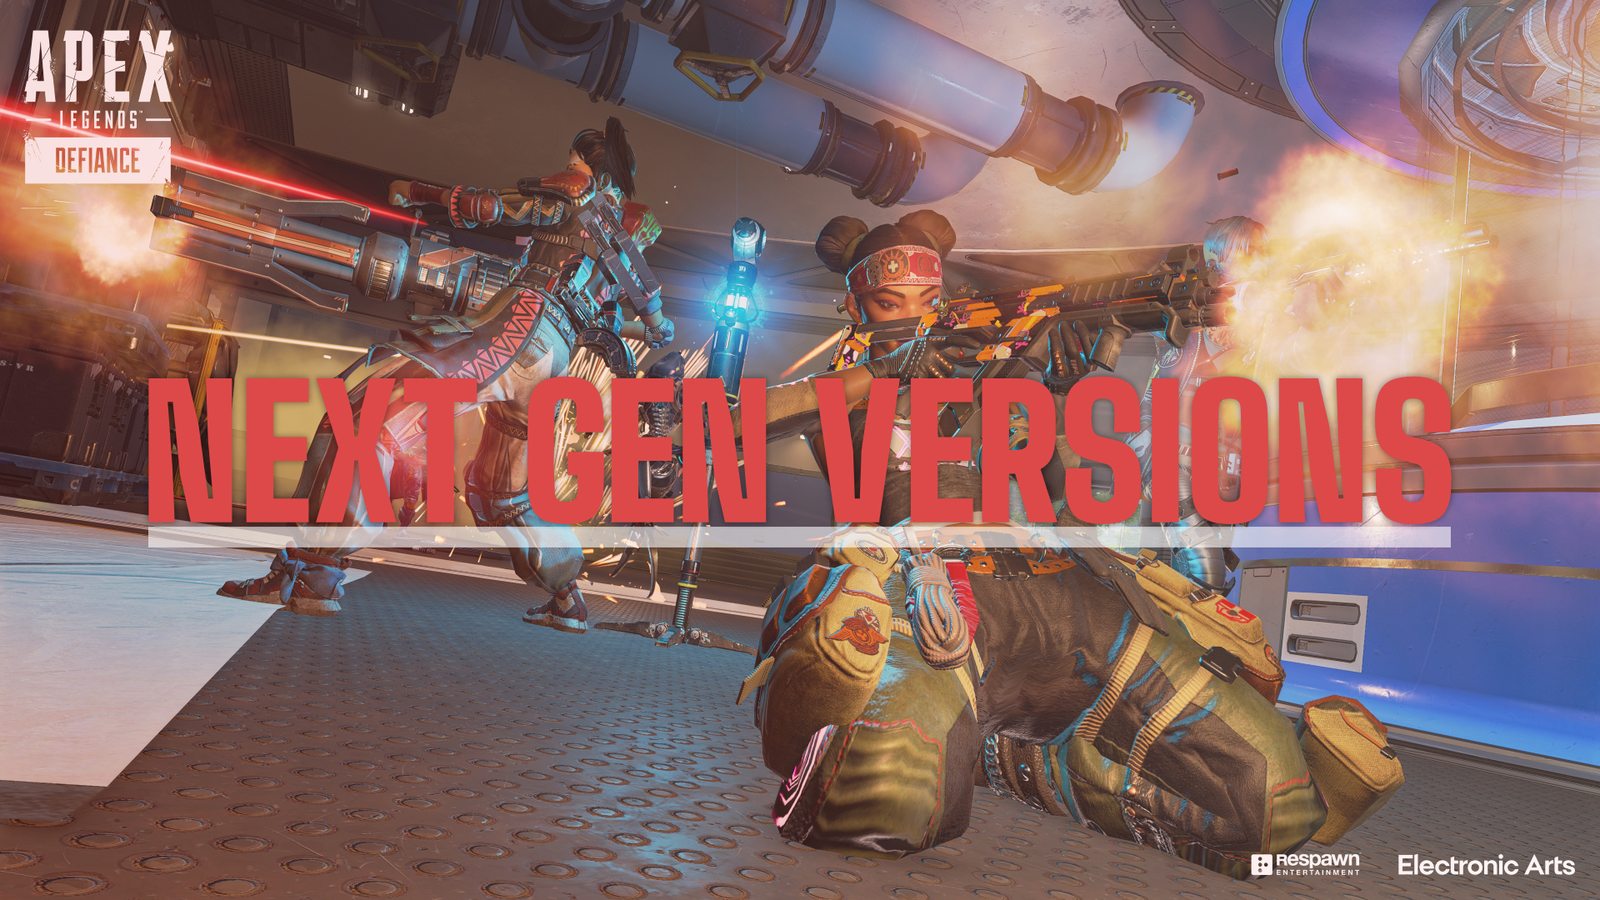 Apex Legends Next-gen: How to Upgrade to PS5 and Xbox Series X Versions